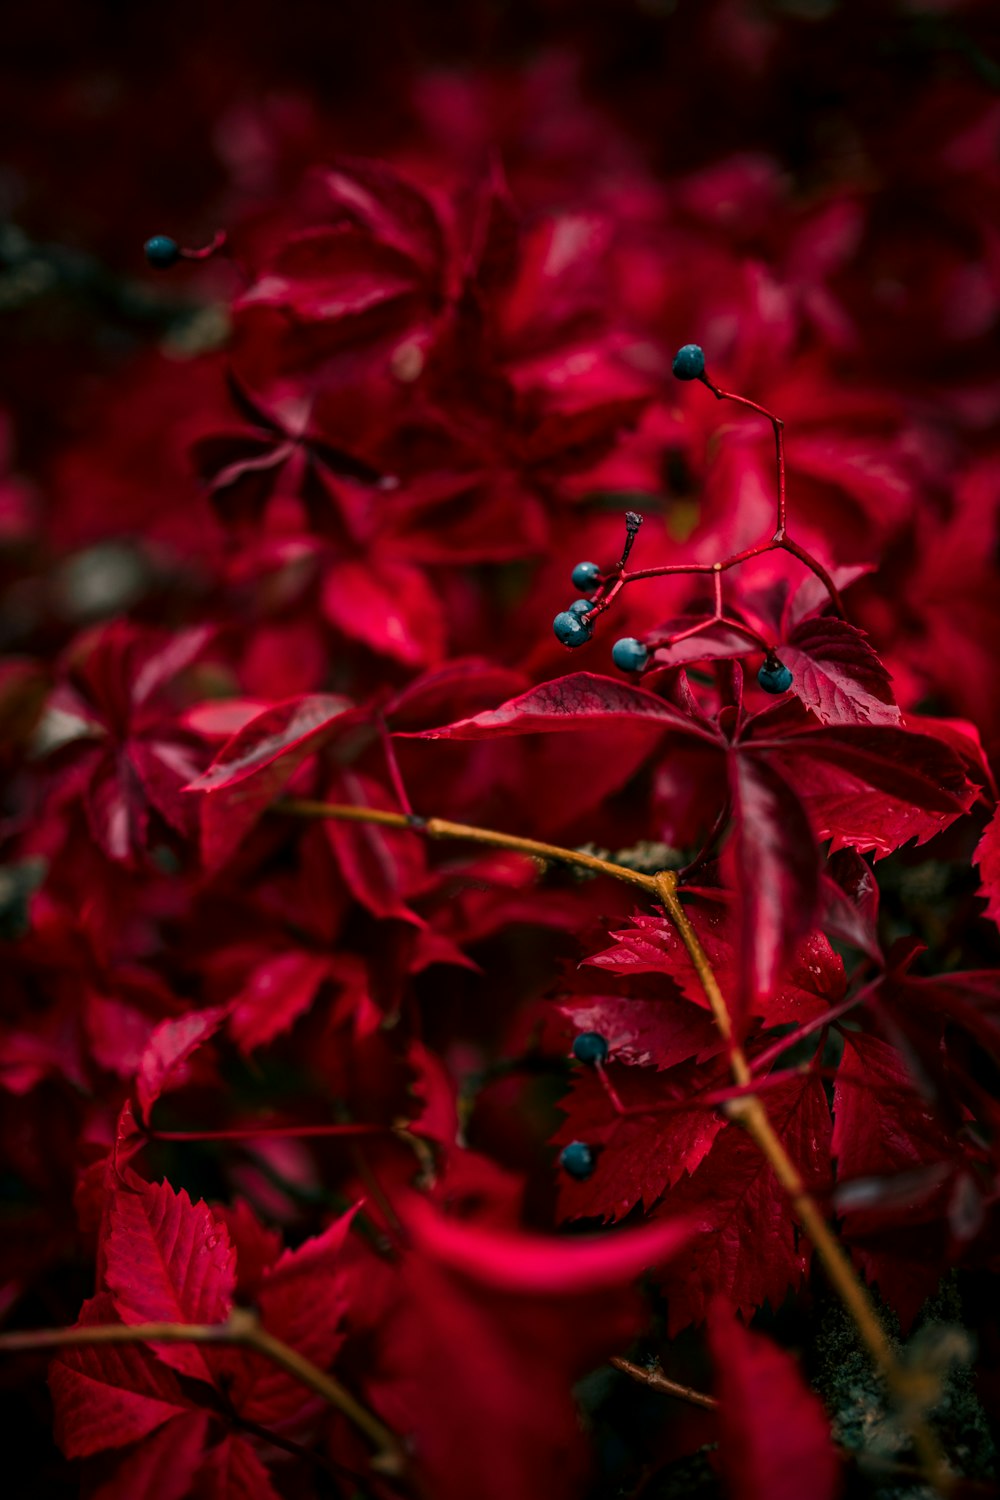 red and green leaves in close up photography